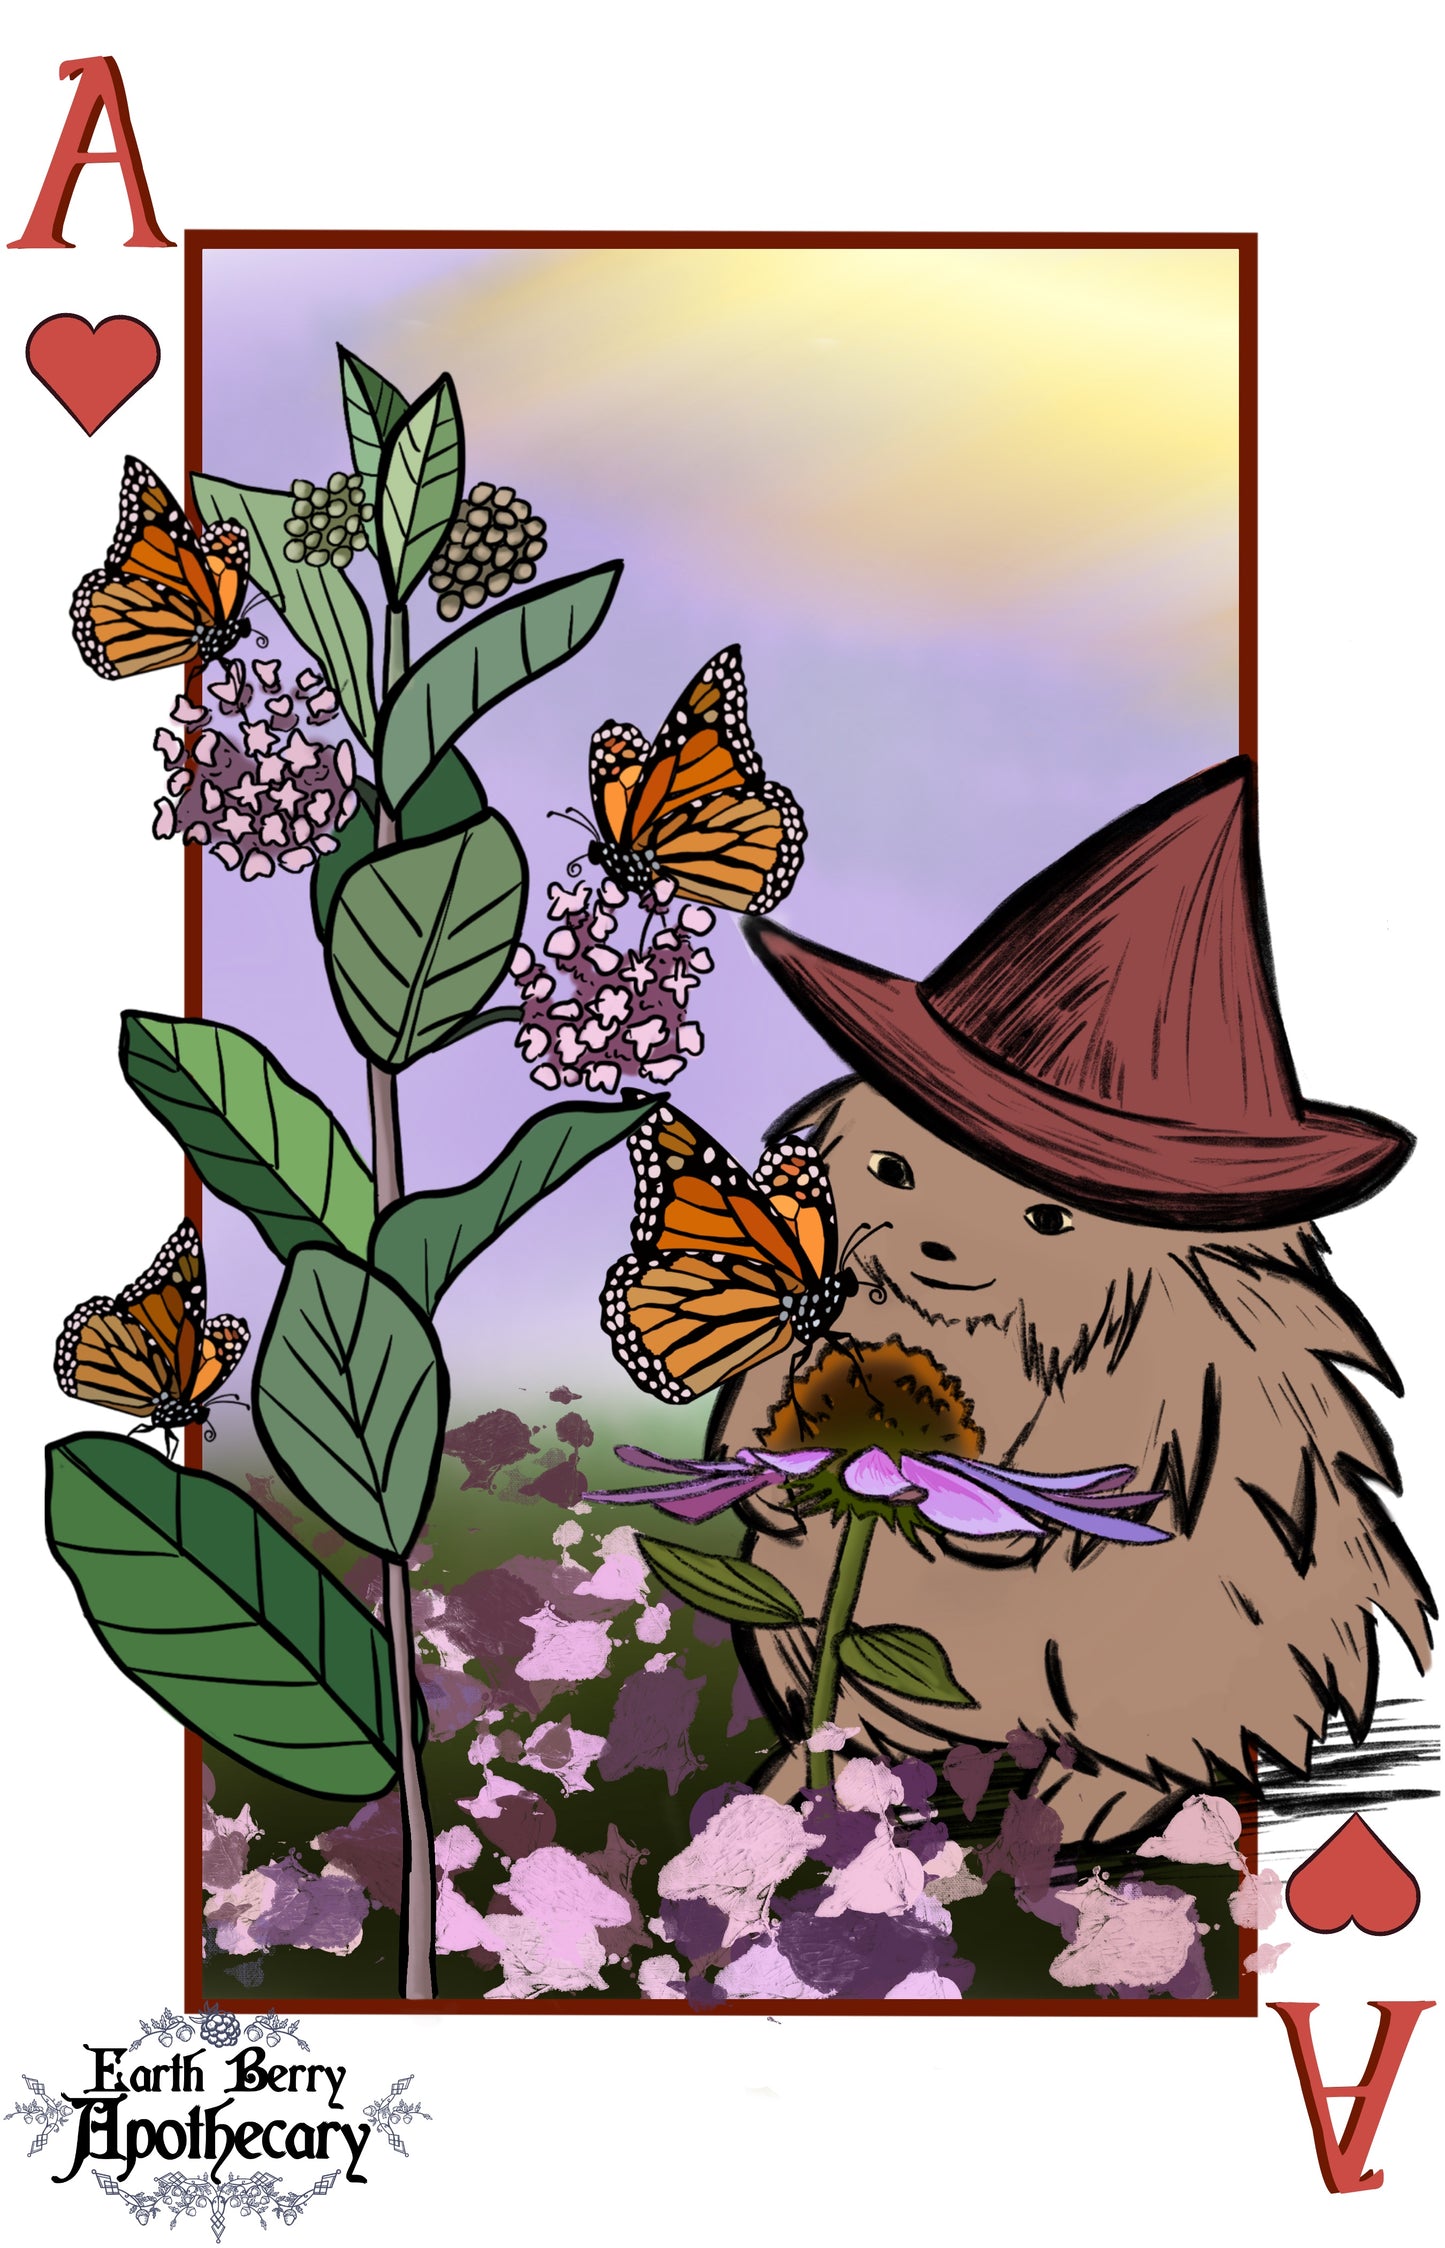 Playing cards inspired by nature. Hedge witch and monarch butterflies on milkweed flowers. Ace of hearts.